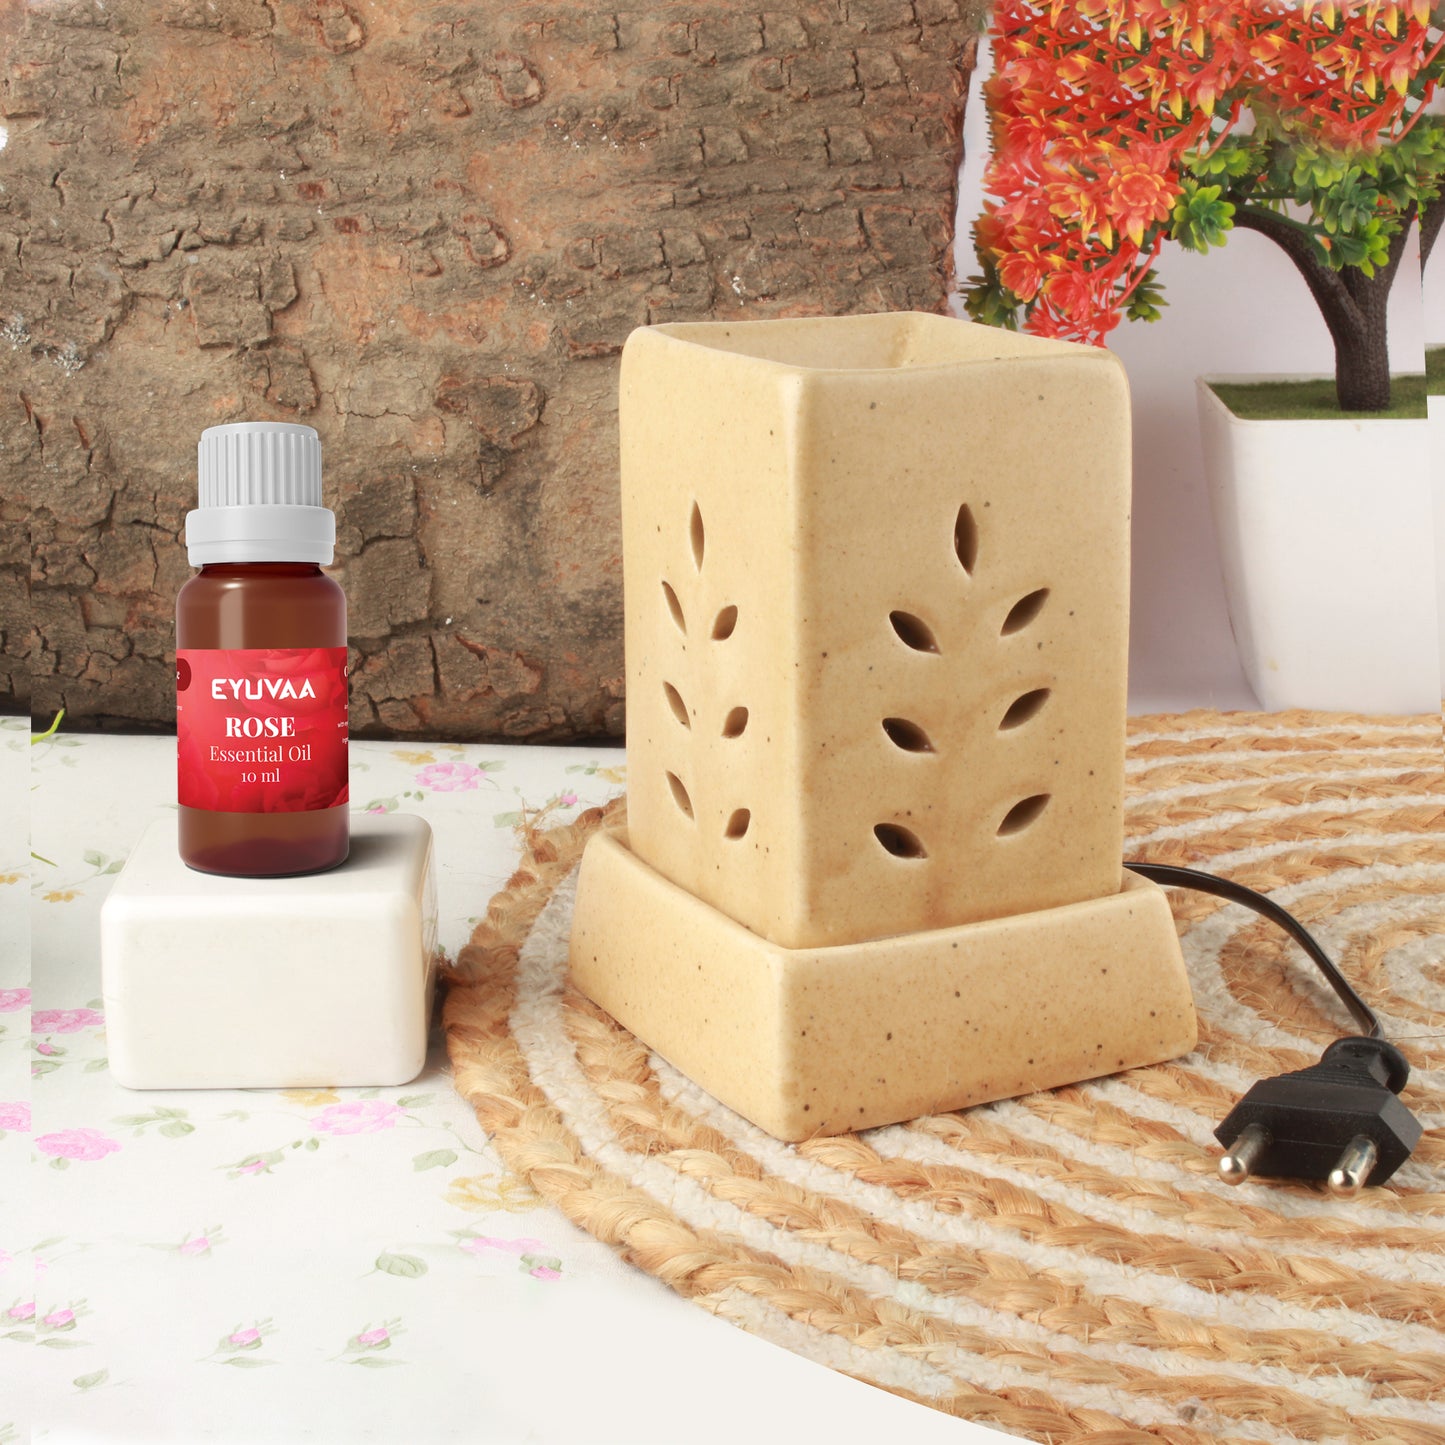 Square Shape Electric Aroma Diffuser, Pillar Diffuser, Aromatherapy Diffuser Set for Home Fragrance, Oil Warmer with 10 ml Fragrance Oil (Brown)